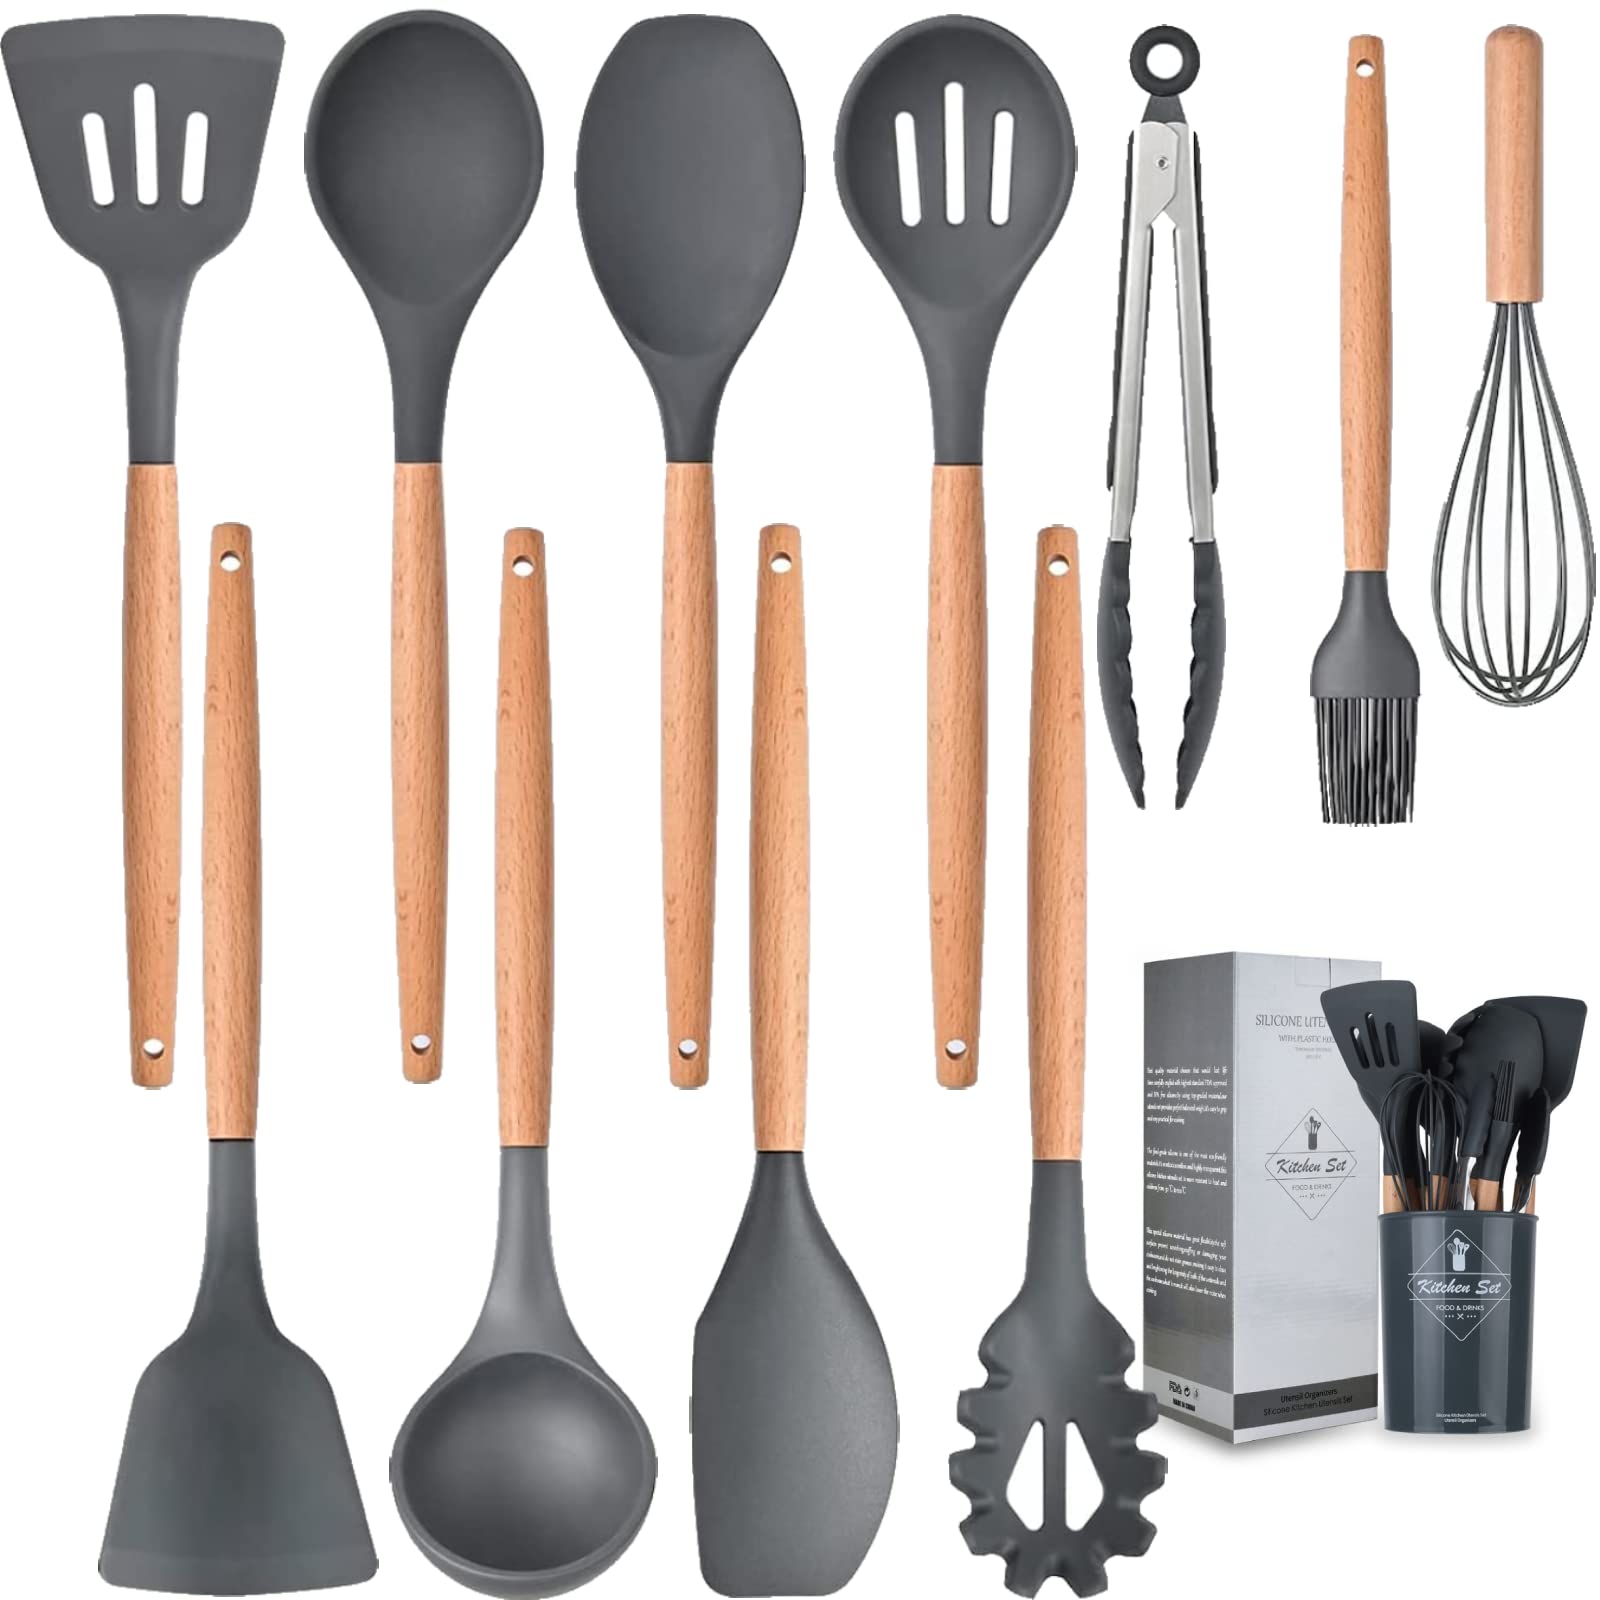 Silicon cooking spoon set